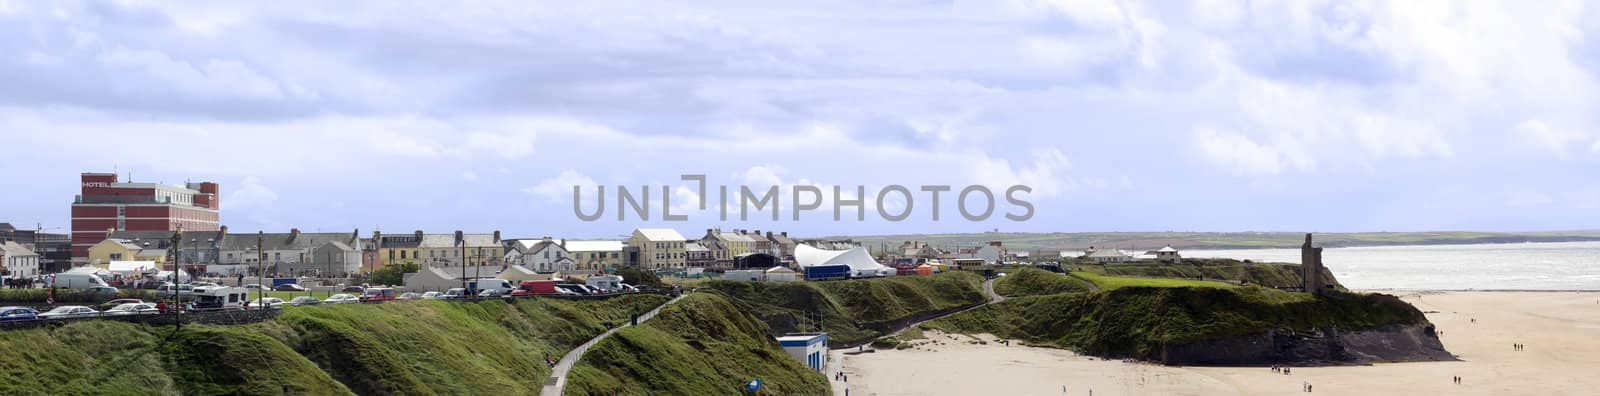 ballybunion town and beach during festval by morrbyte